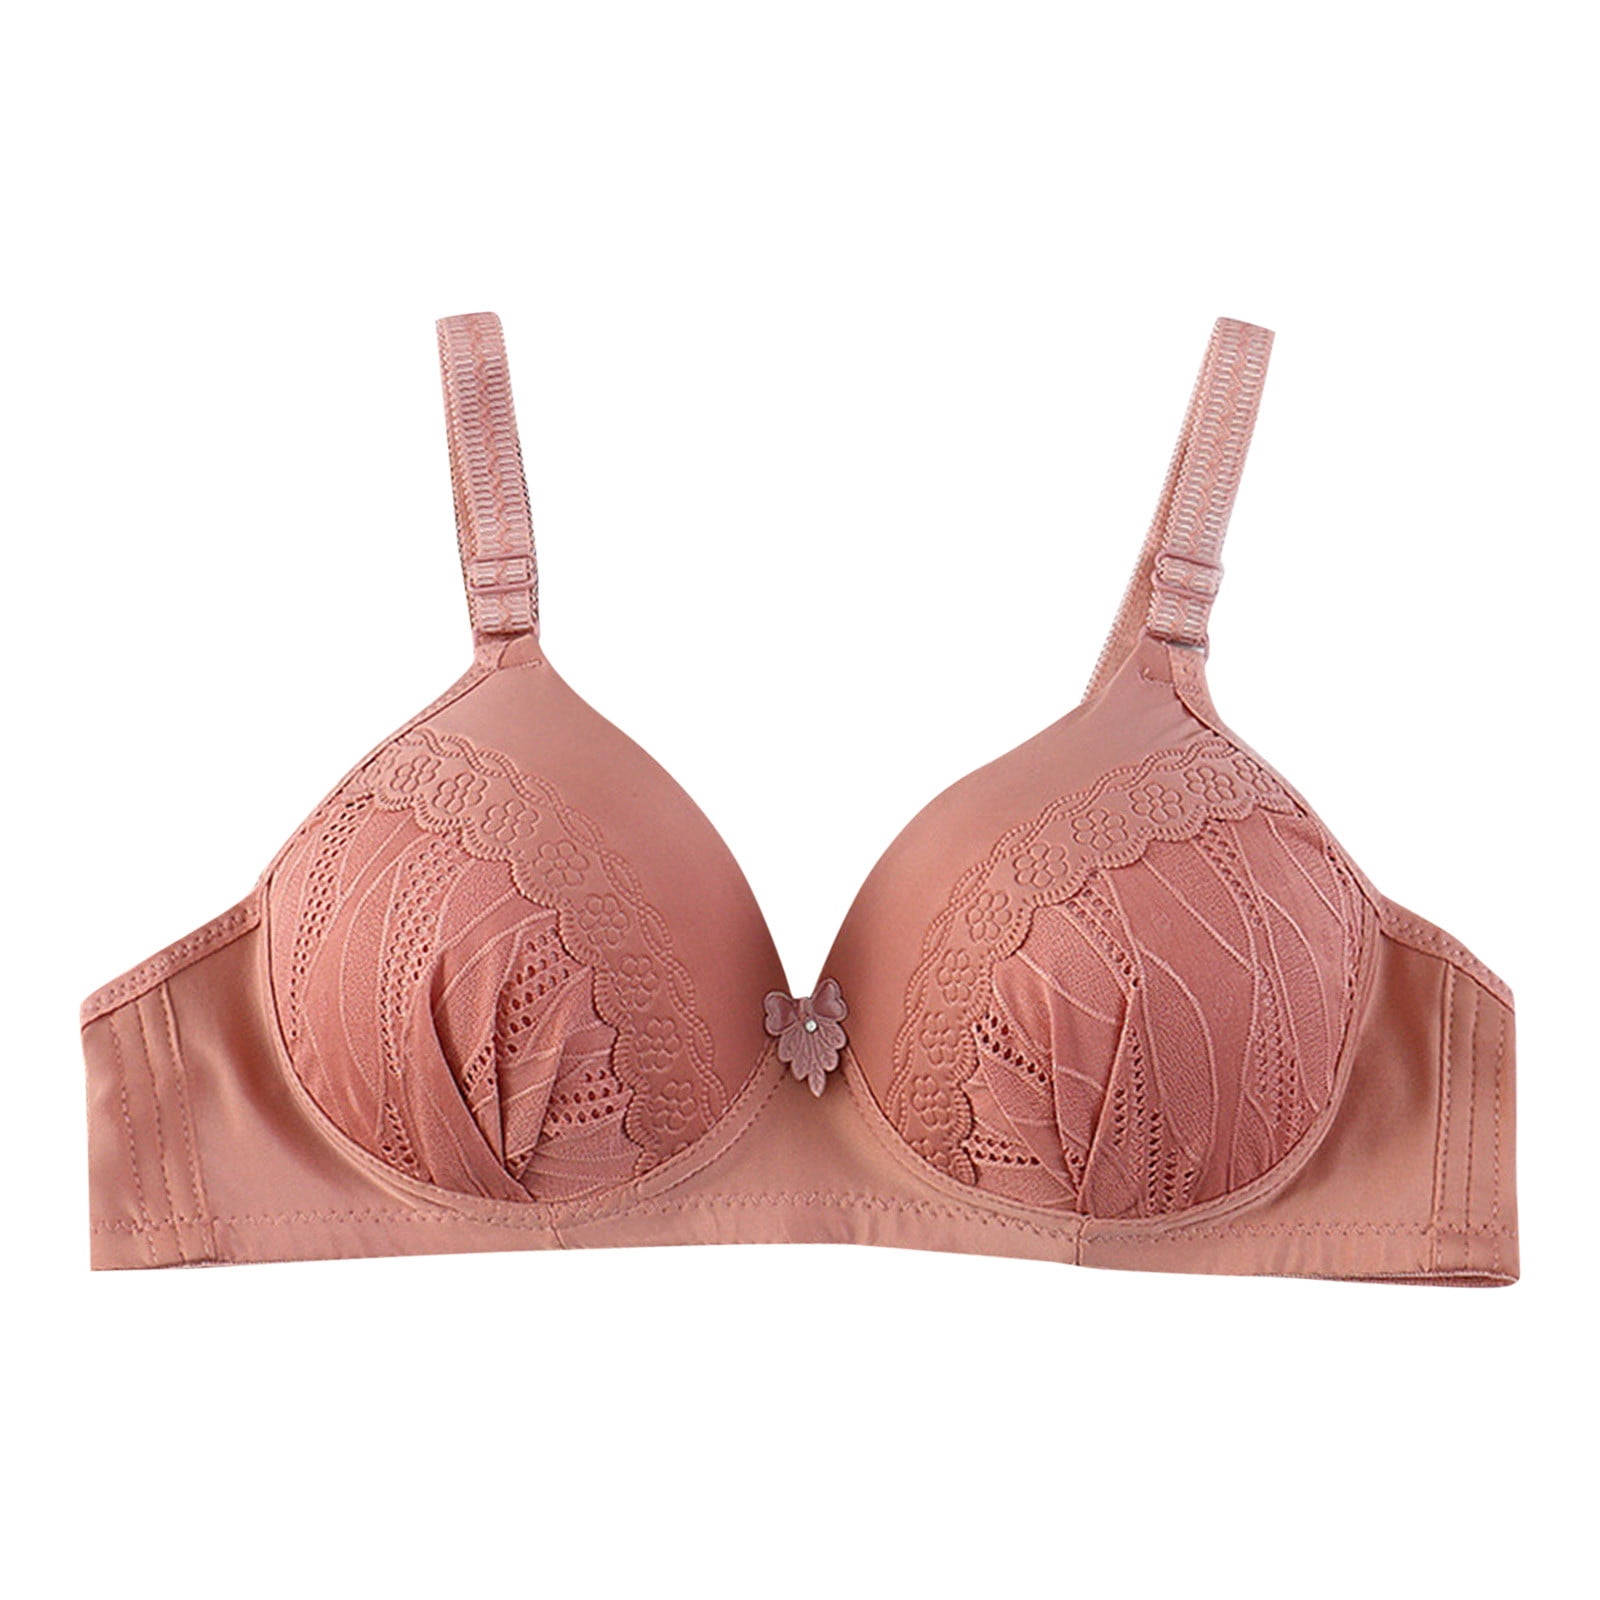 1pc Women's Lace Edge Push Up Bra With Extra Padding And Side